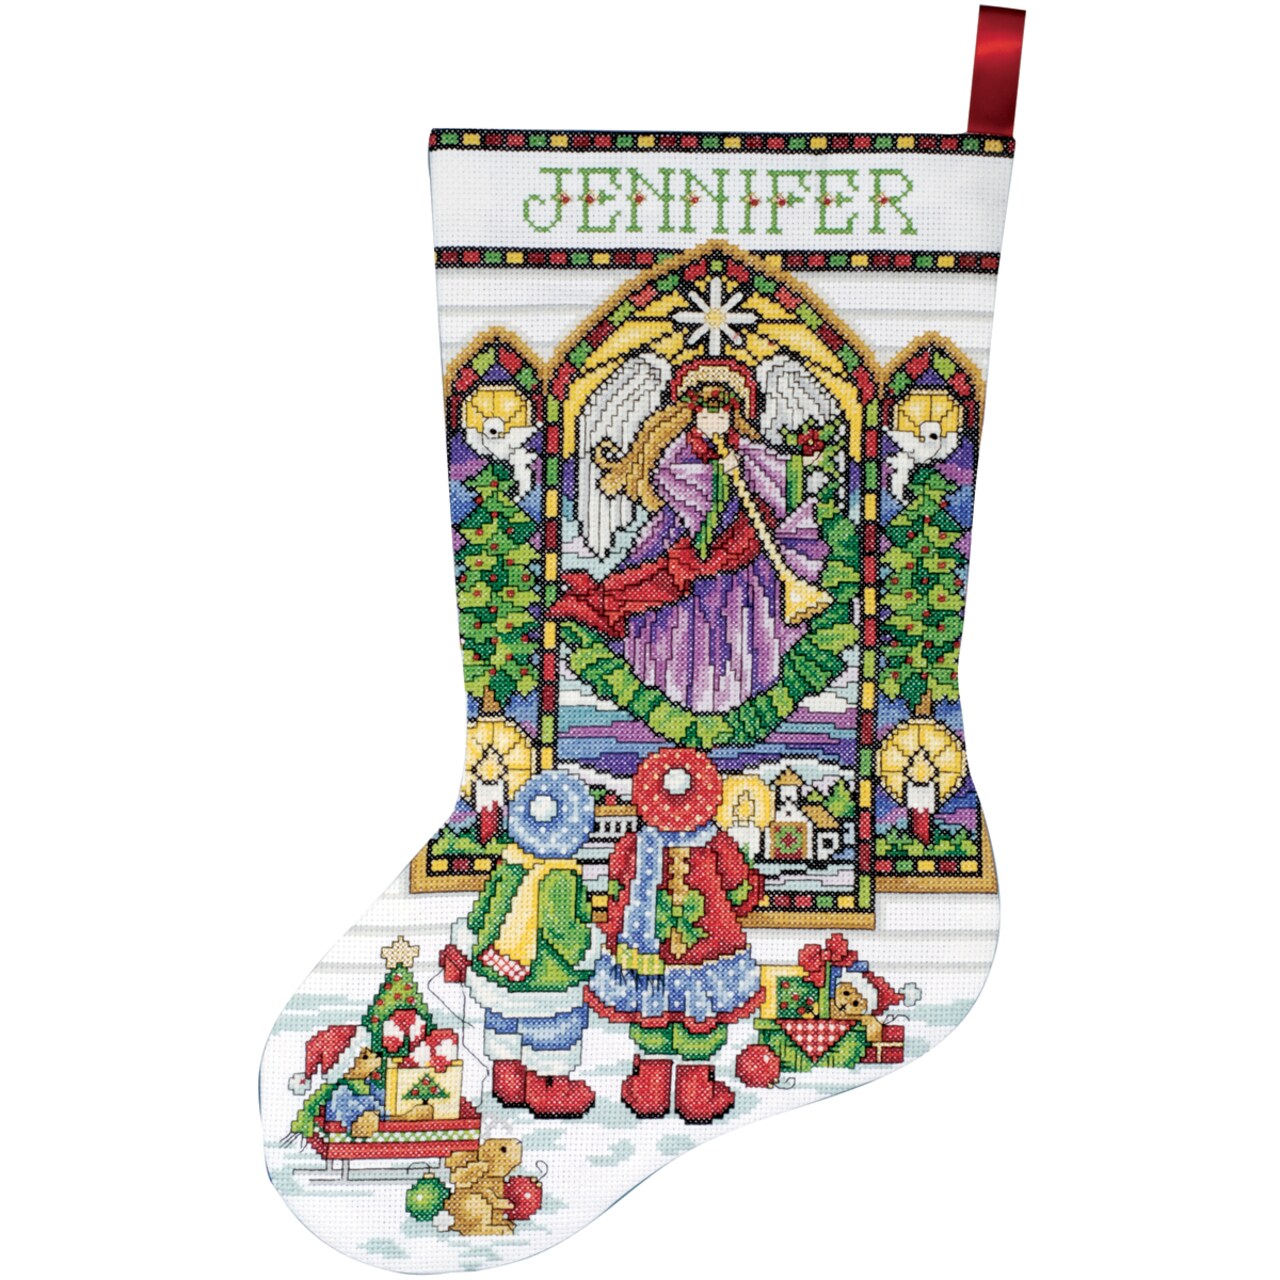 Design Works Counted Cross Stitch Stocking Kit 17 Long-Stained Glass (14  Count)